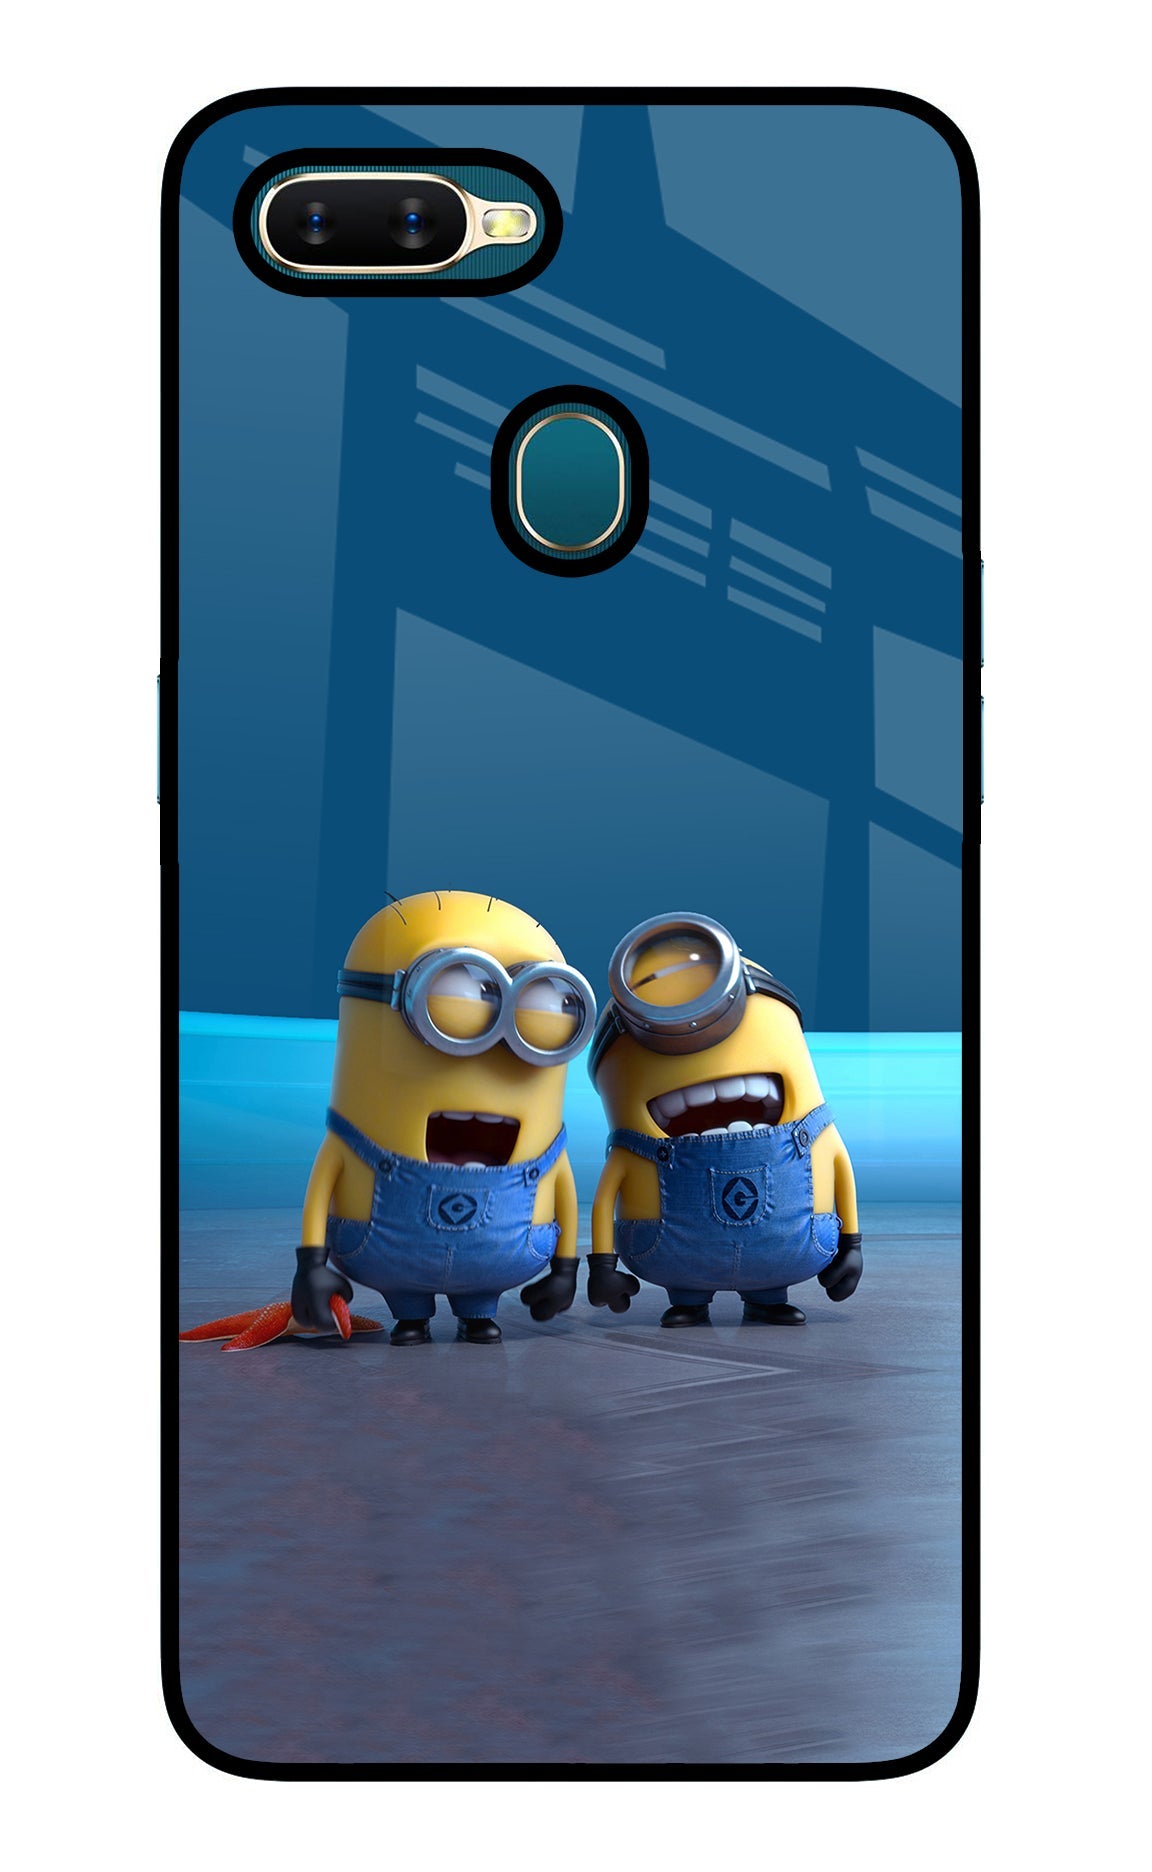 Minion Laughing Oppo A7/A5s/A12 Glass Case